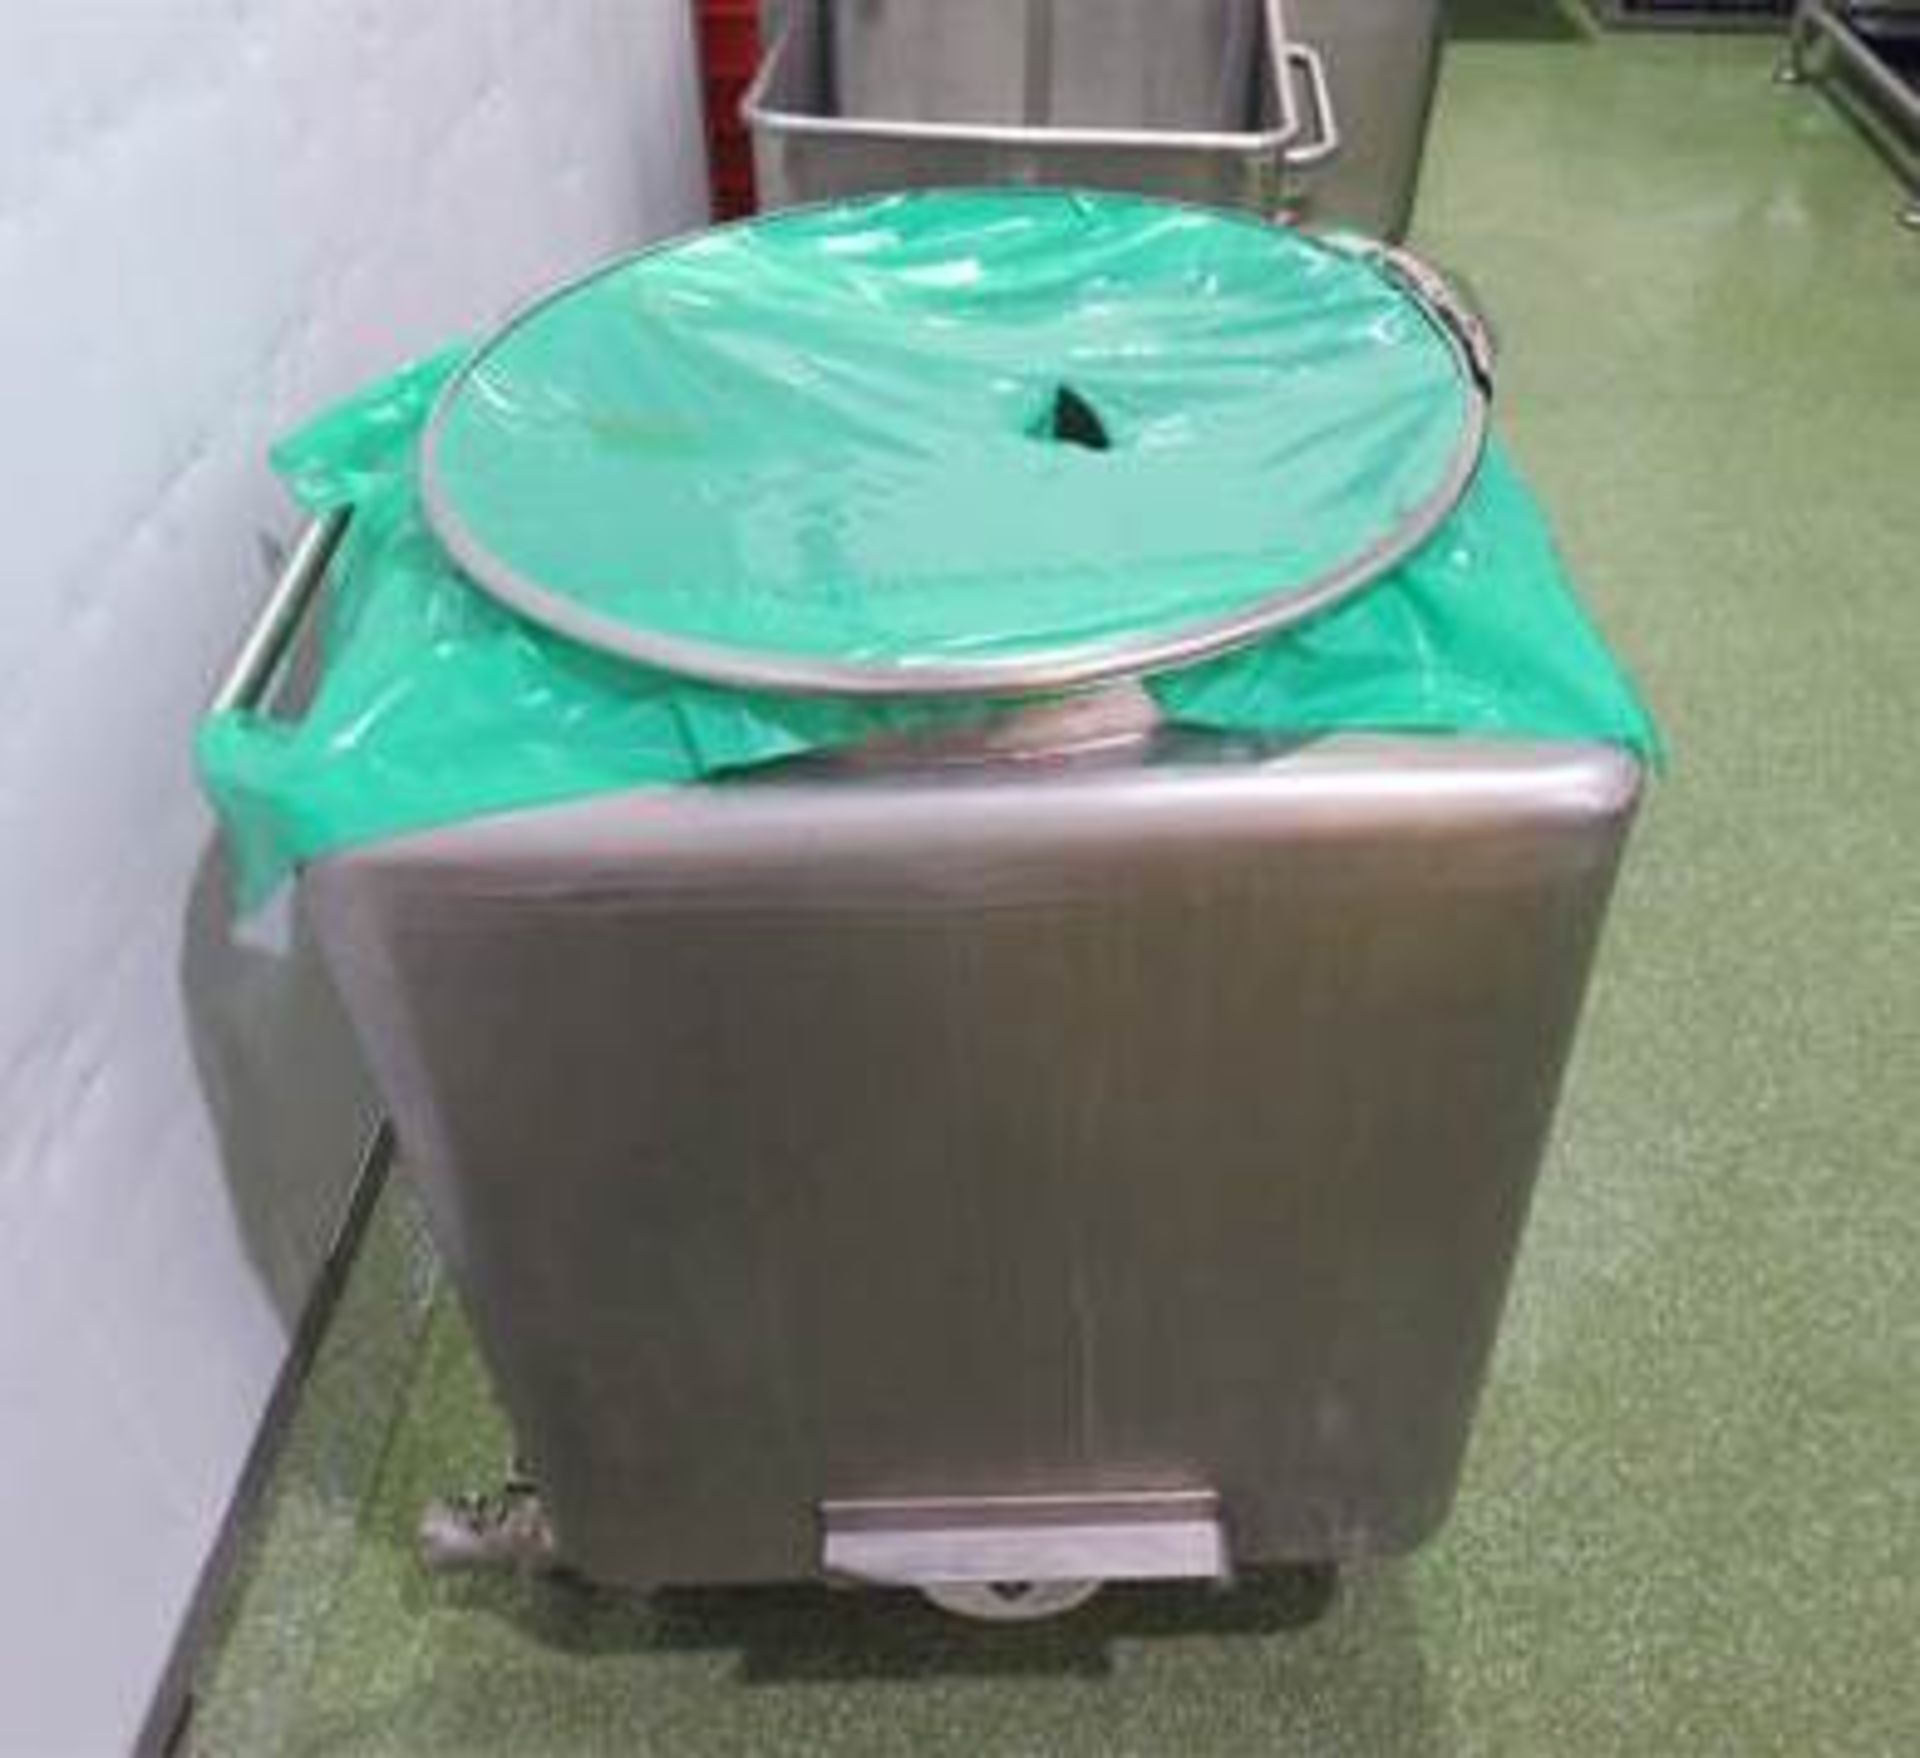 1 x S/s Mobile liquid bins with bottom side discharge. Approx. 600 x 600 x 880mm high. Lift out £10